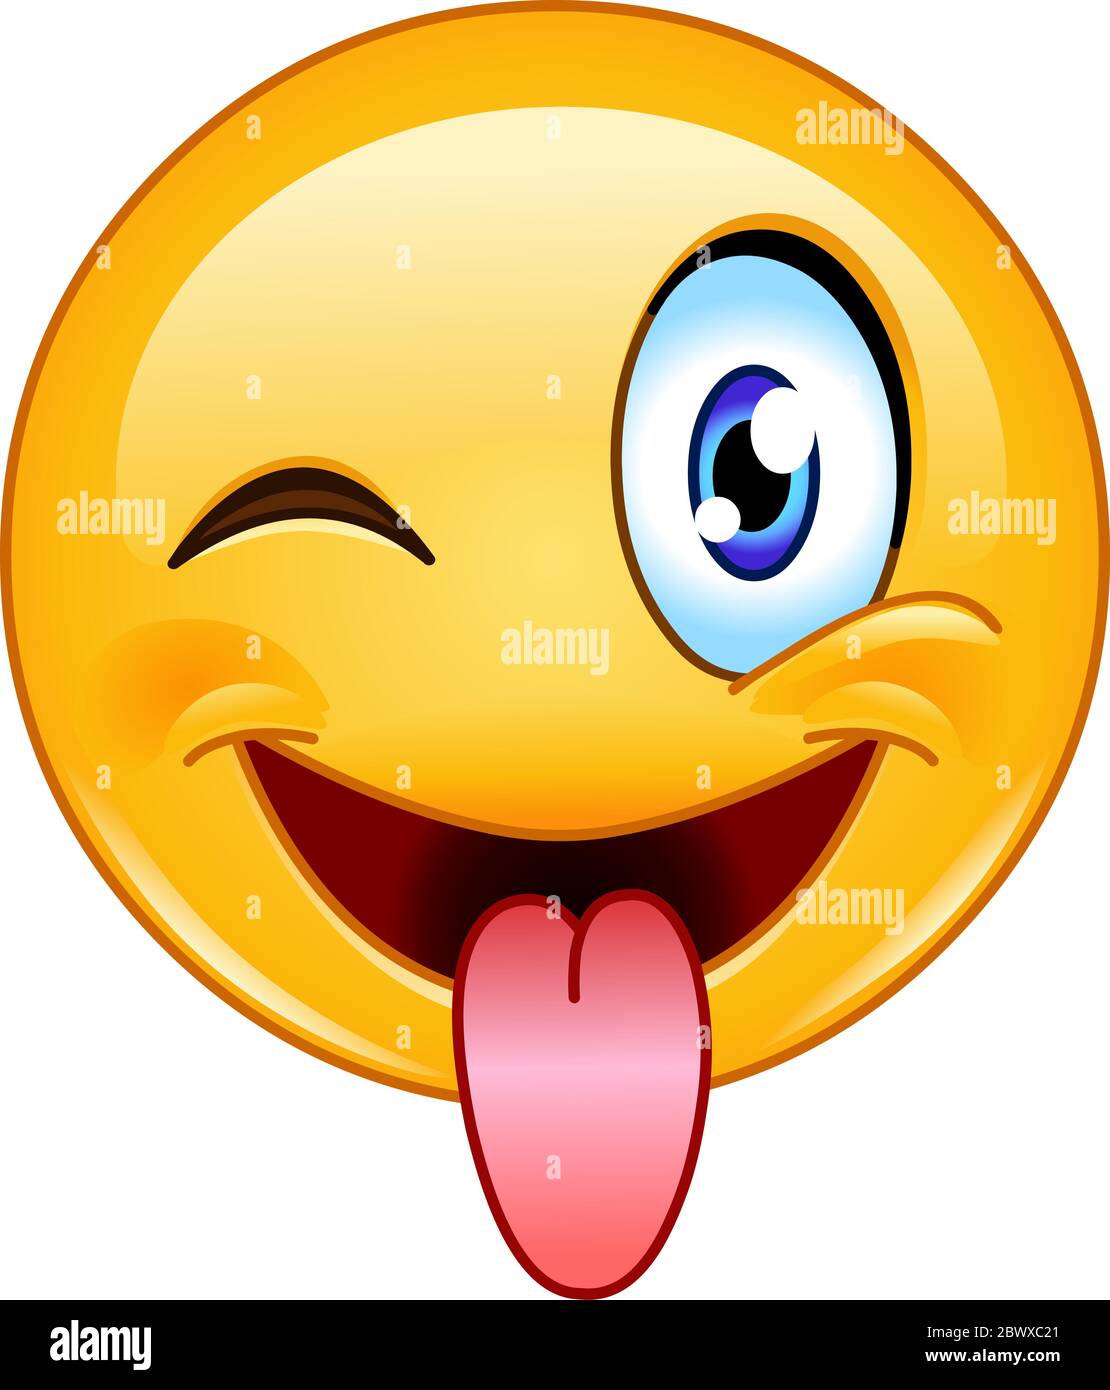 Emoticon with stuck out tongue and winking eye Stock Vector